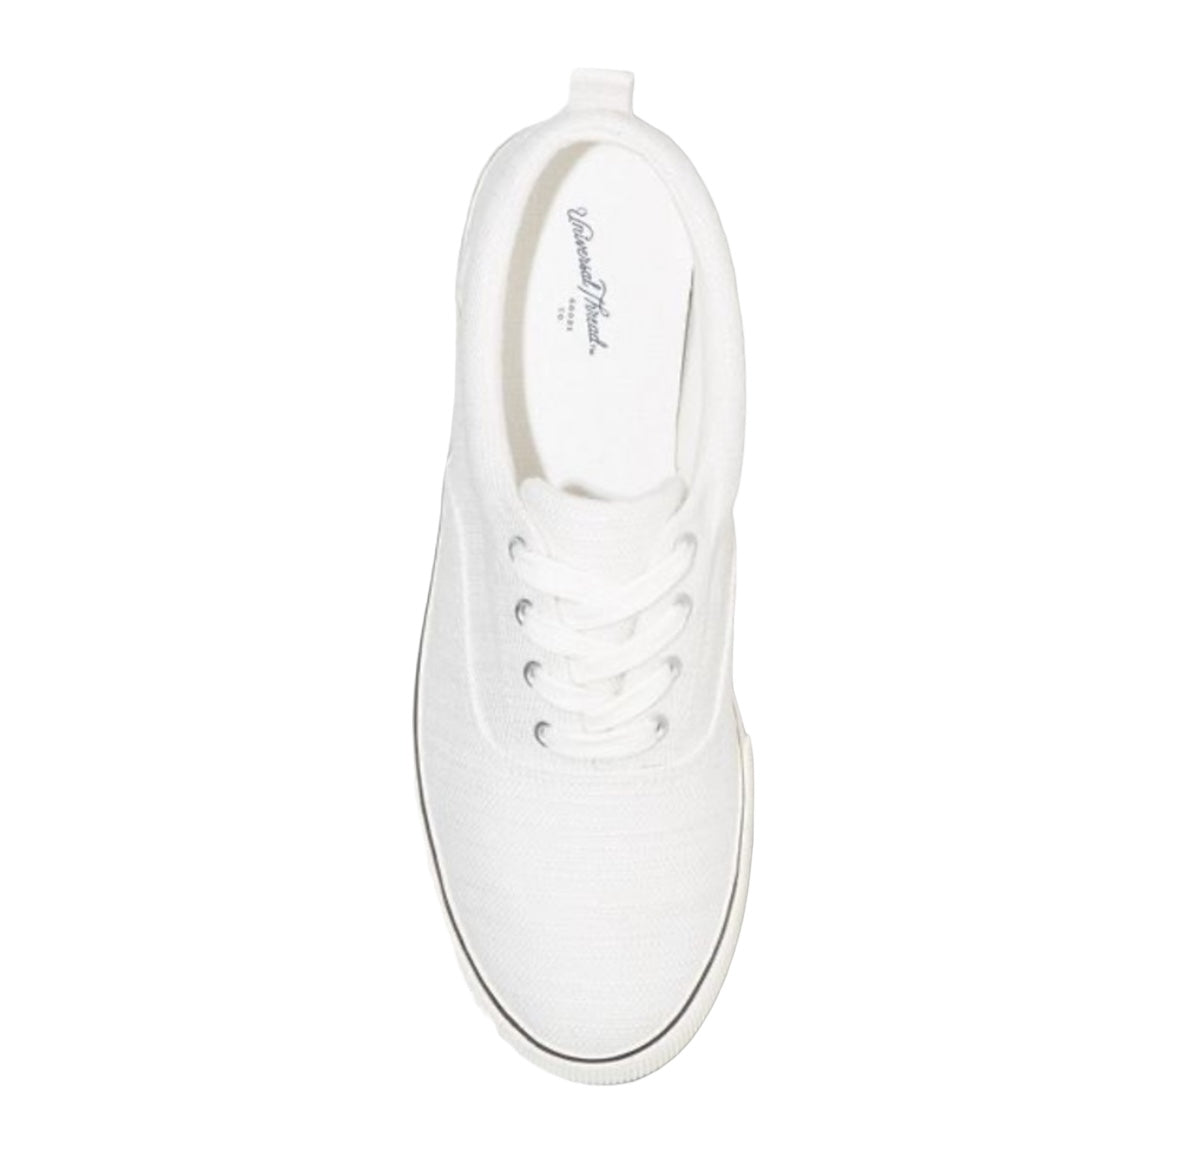 White Sneakers Molly Vulcanized Lace-Up Sneakers - Universal Thread - Unisex - Women's - Mens by Brands Overstock | Brands Overstock